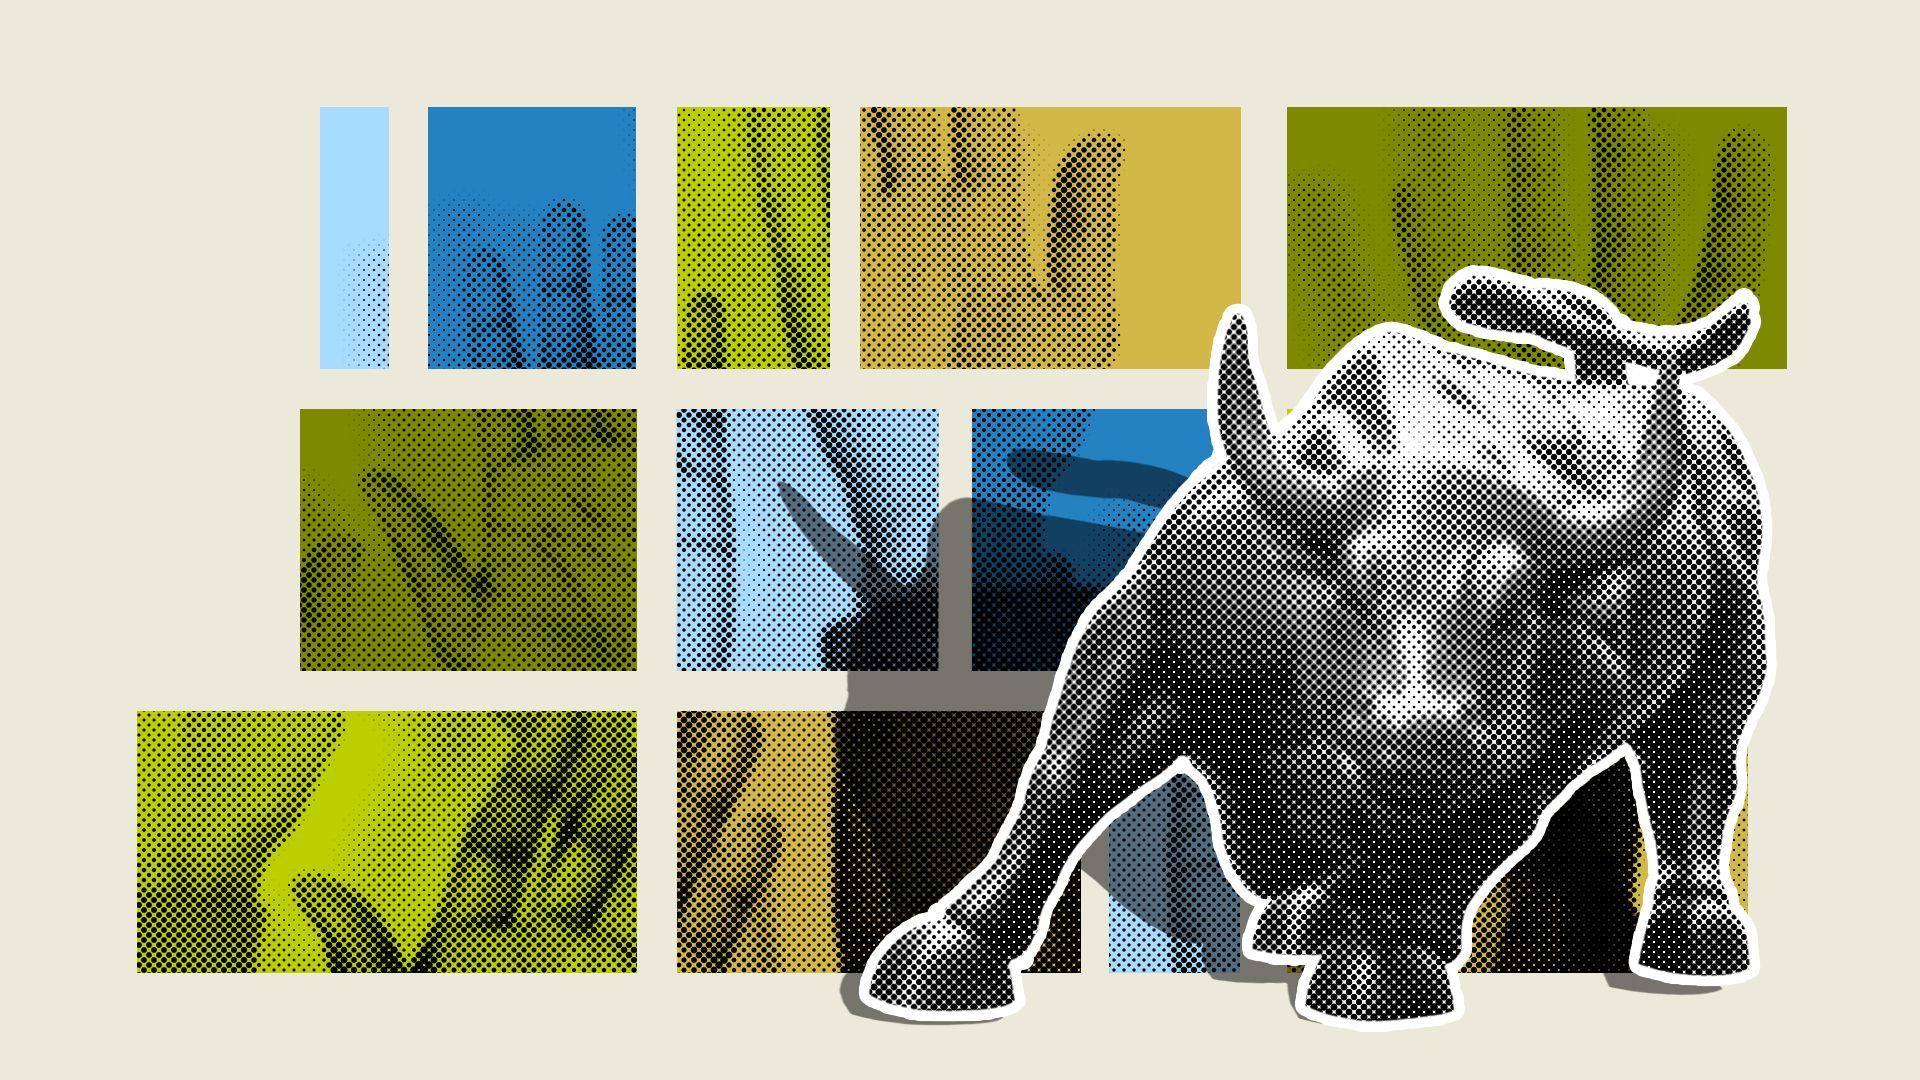 Illustration a diverse array of raised hands behind the Wall Street bull statue